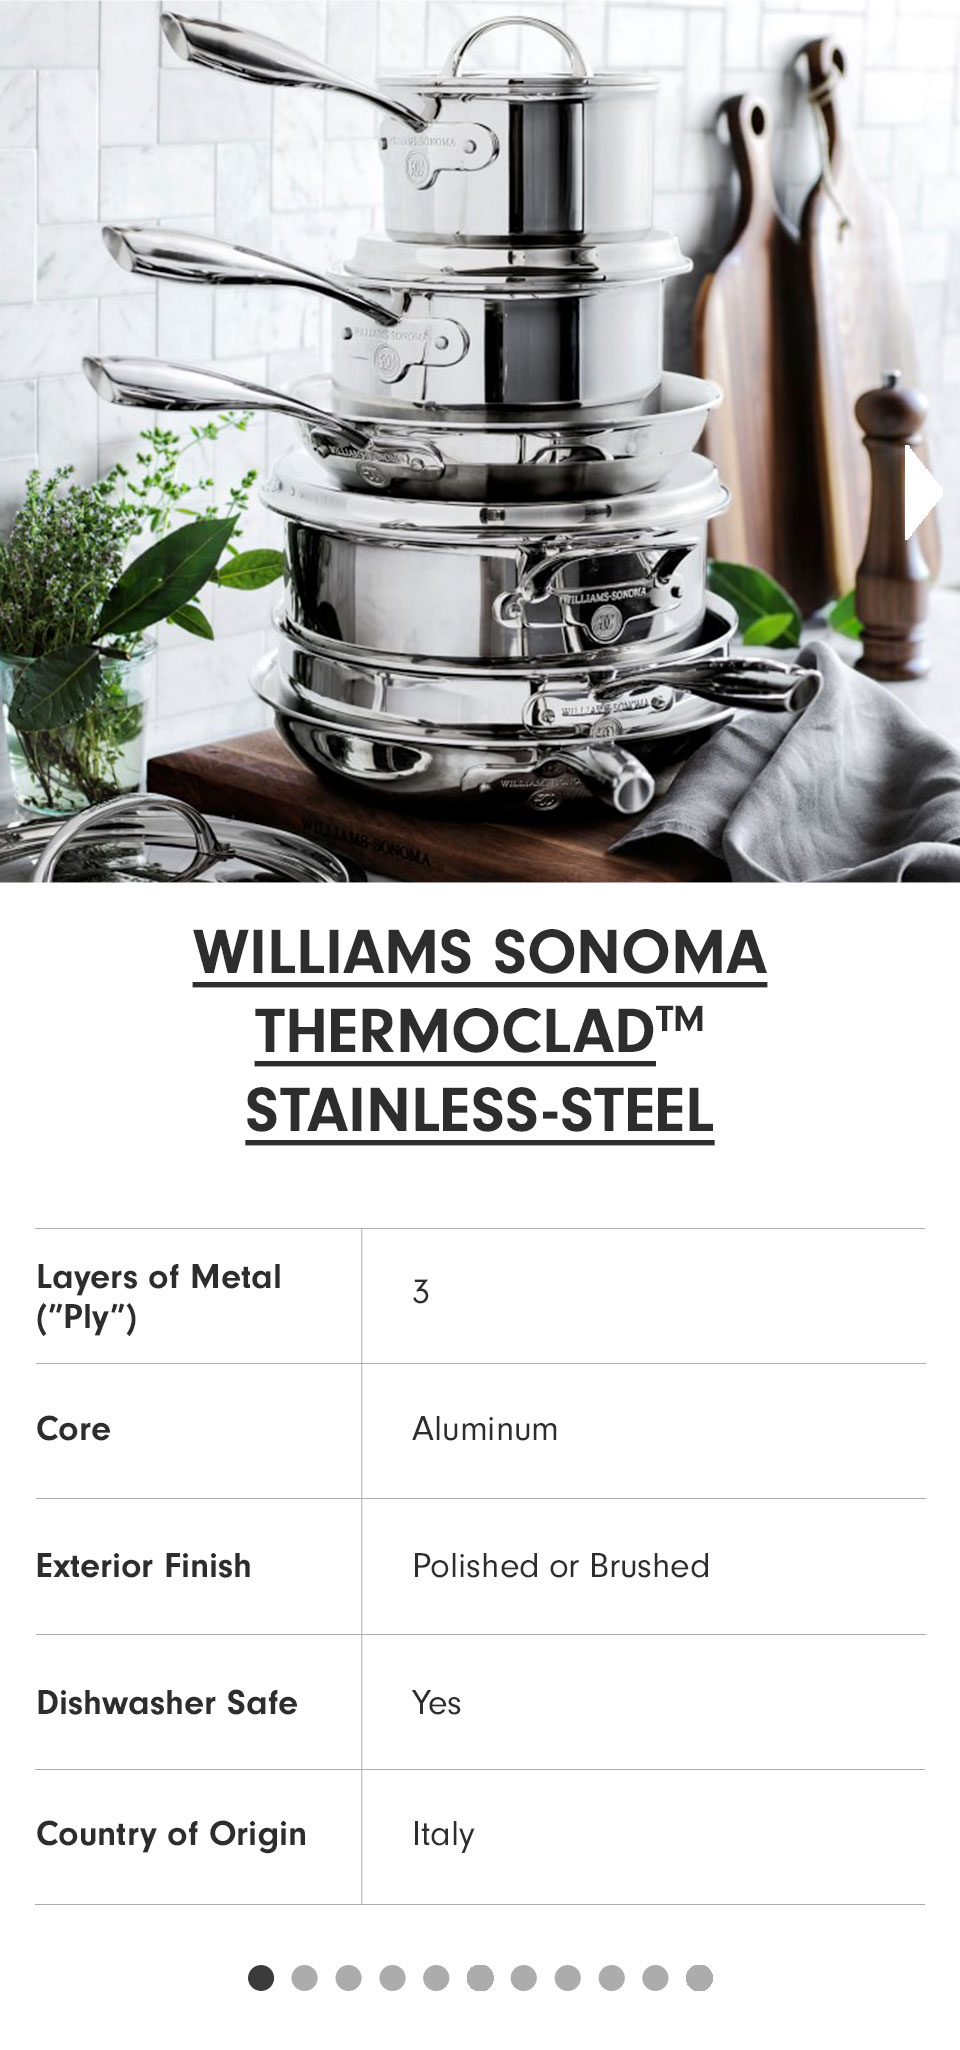 Williams Sonoma ThermoClad Stainless-Steel >